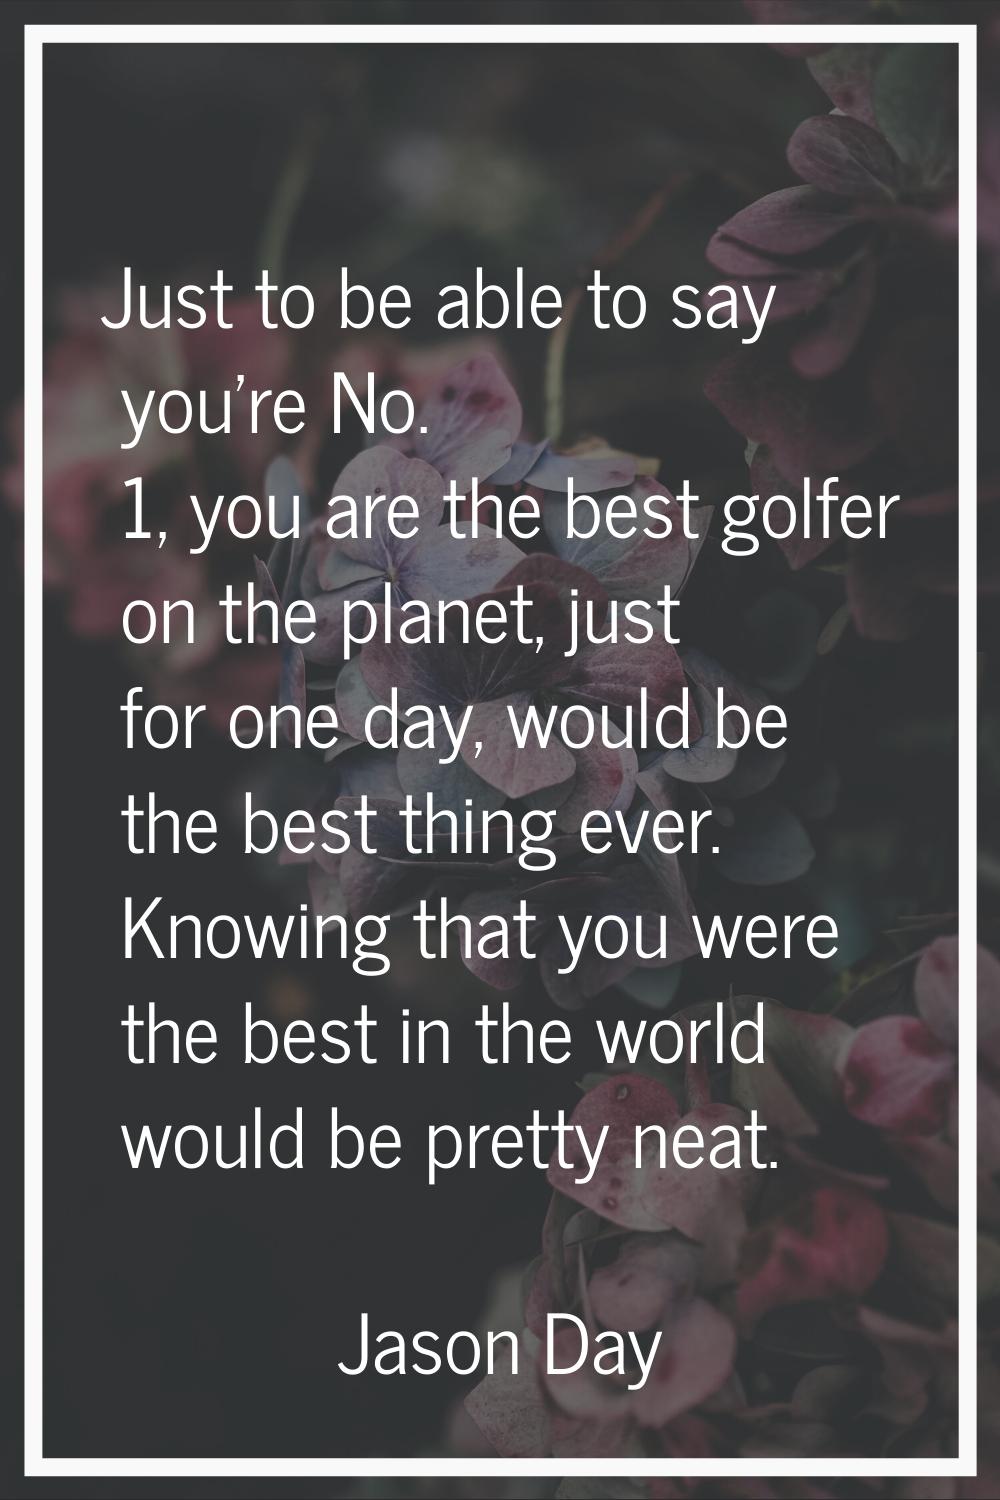 Just to be able to say you're No. 1, you are the best golfer on the planet, just for one day, would